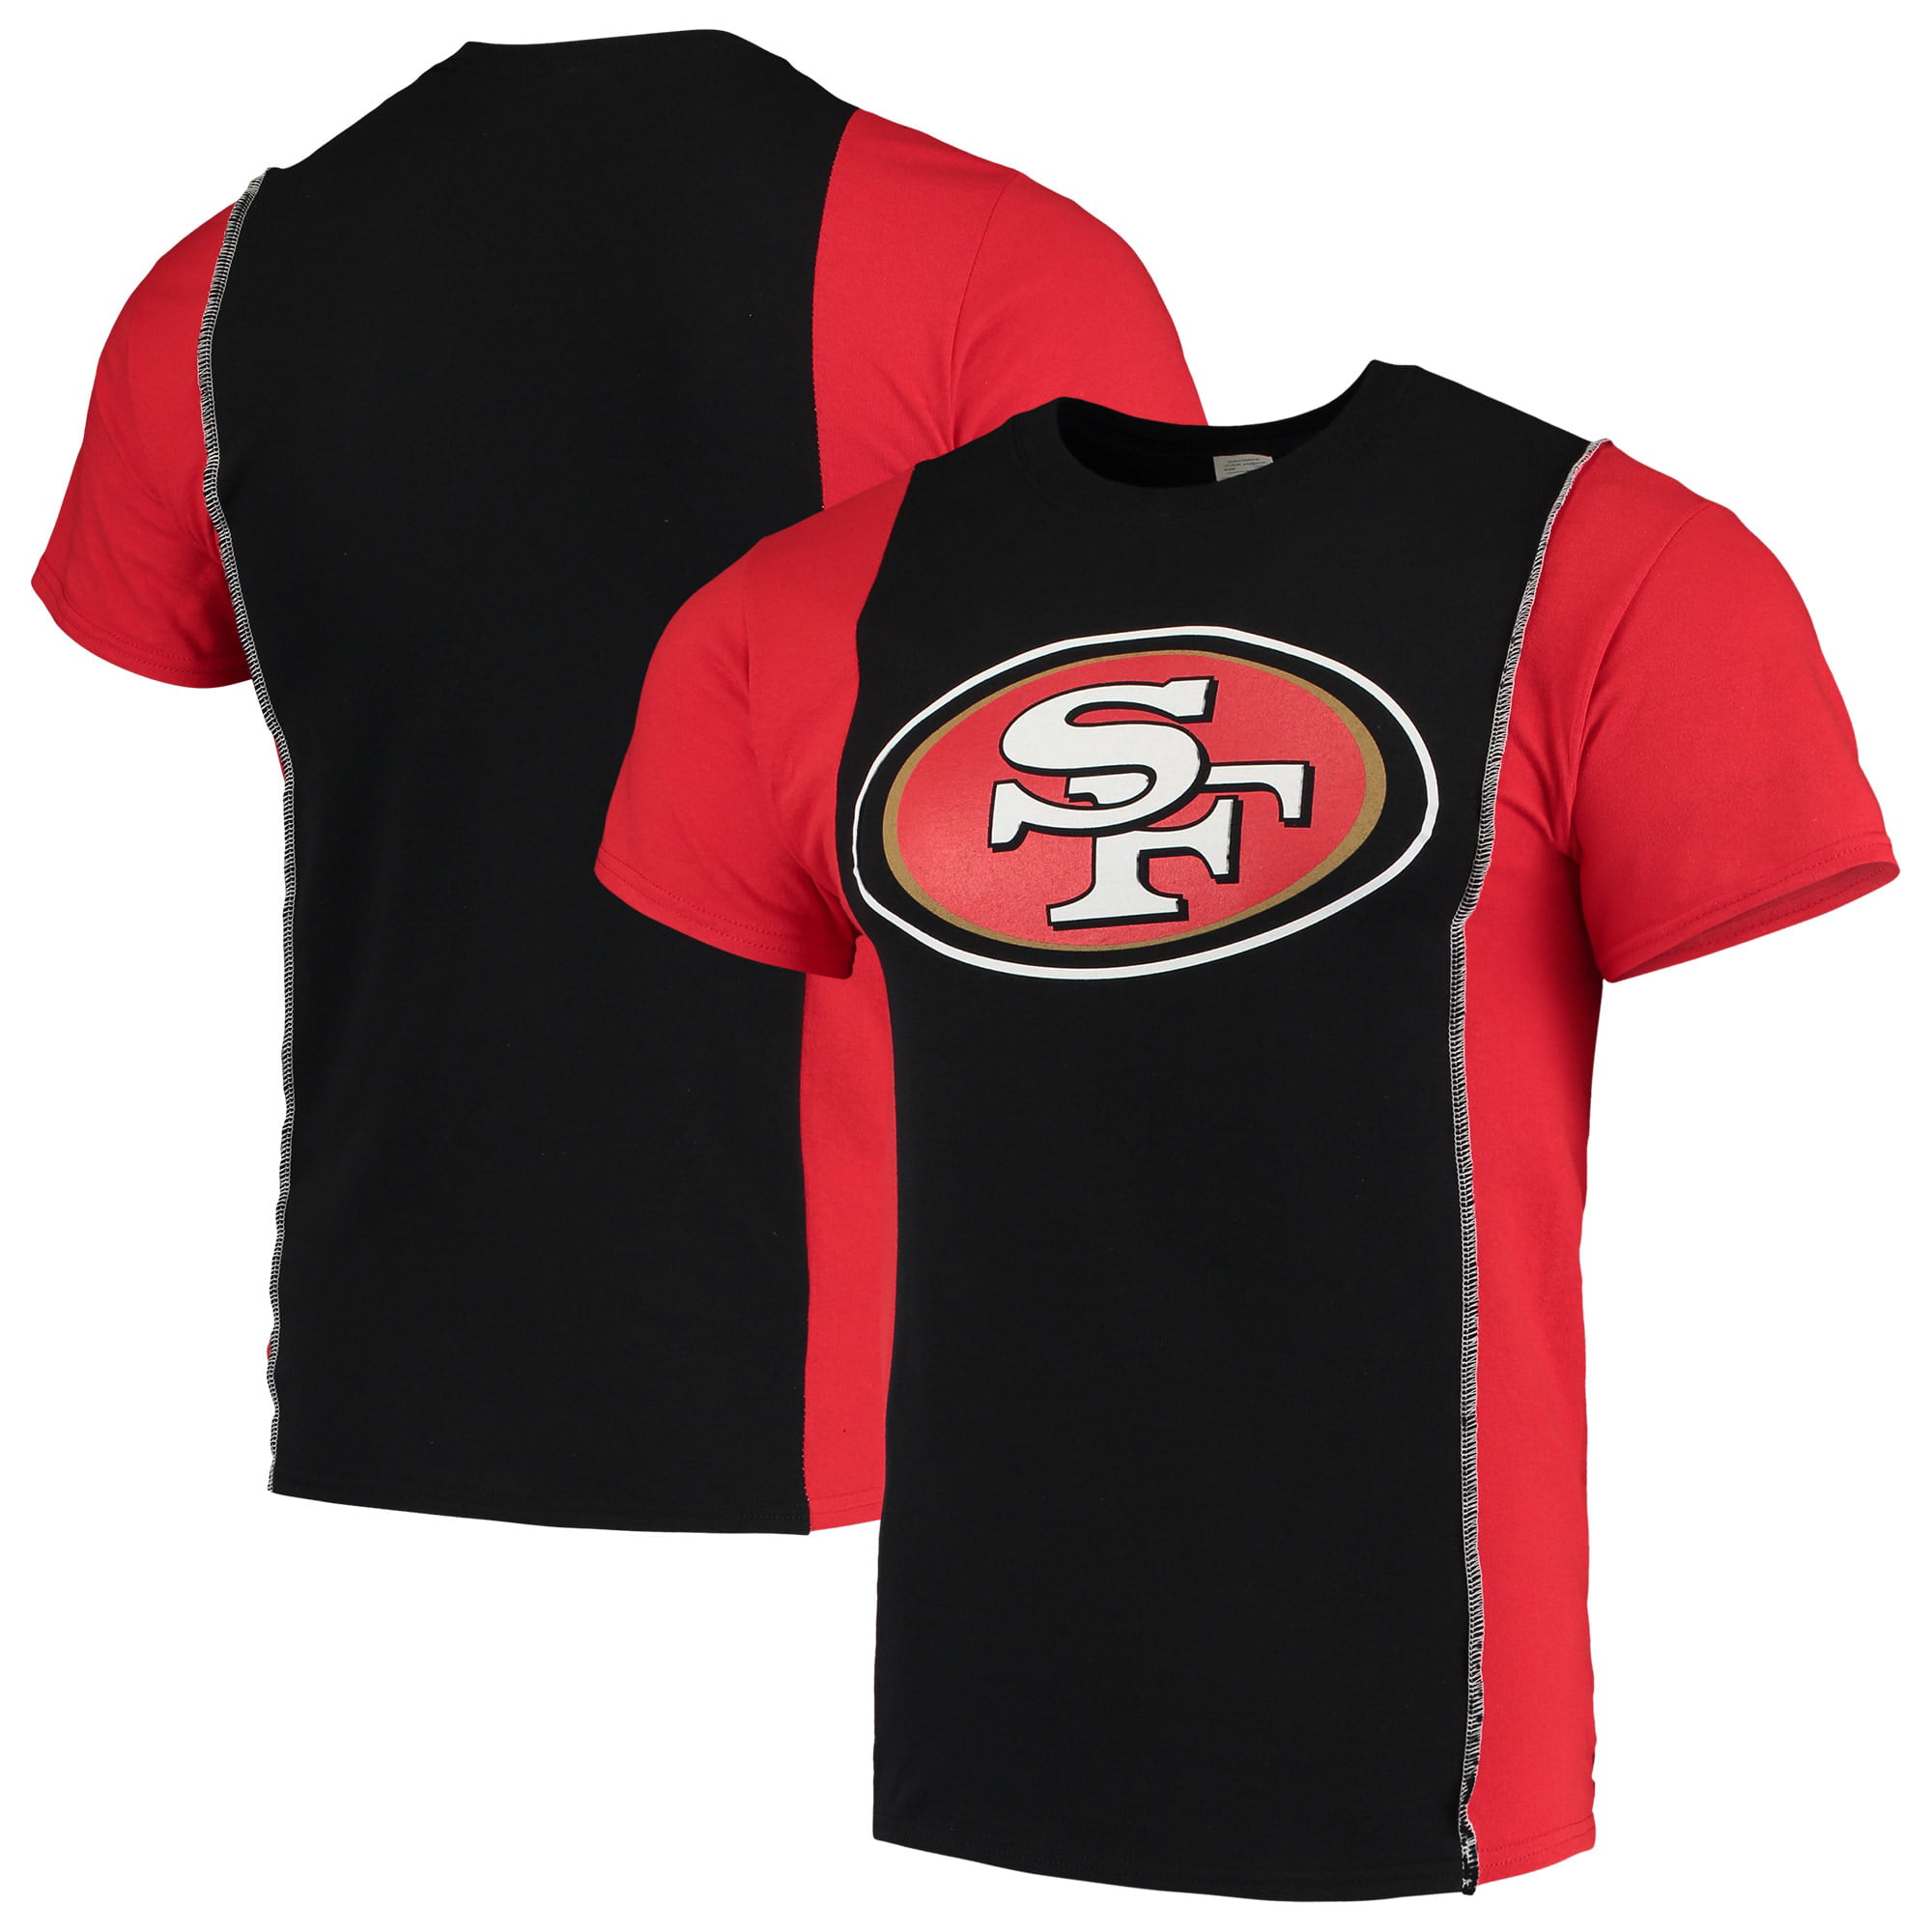 San Francisco 49ers Clothing - Management And Leadership